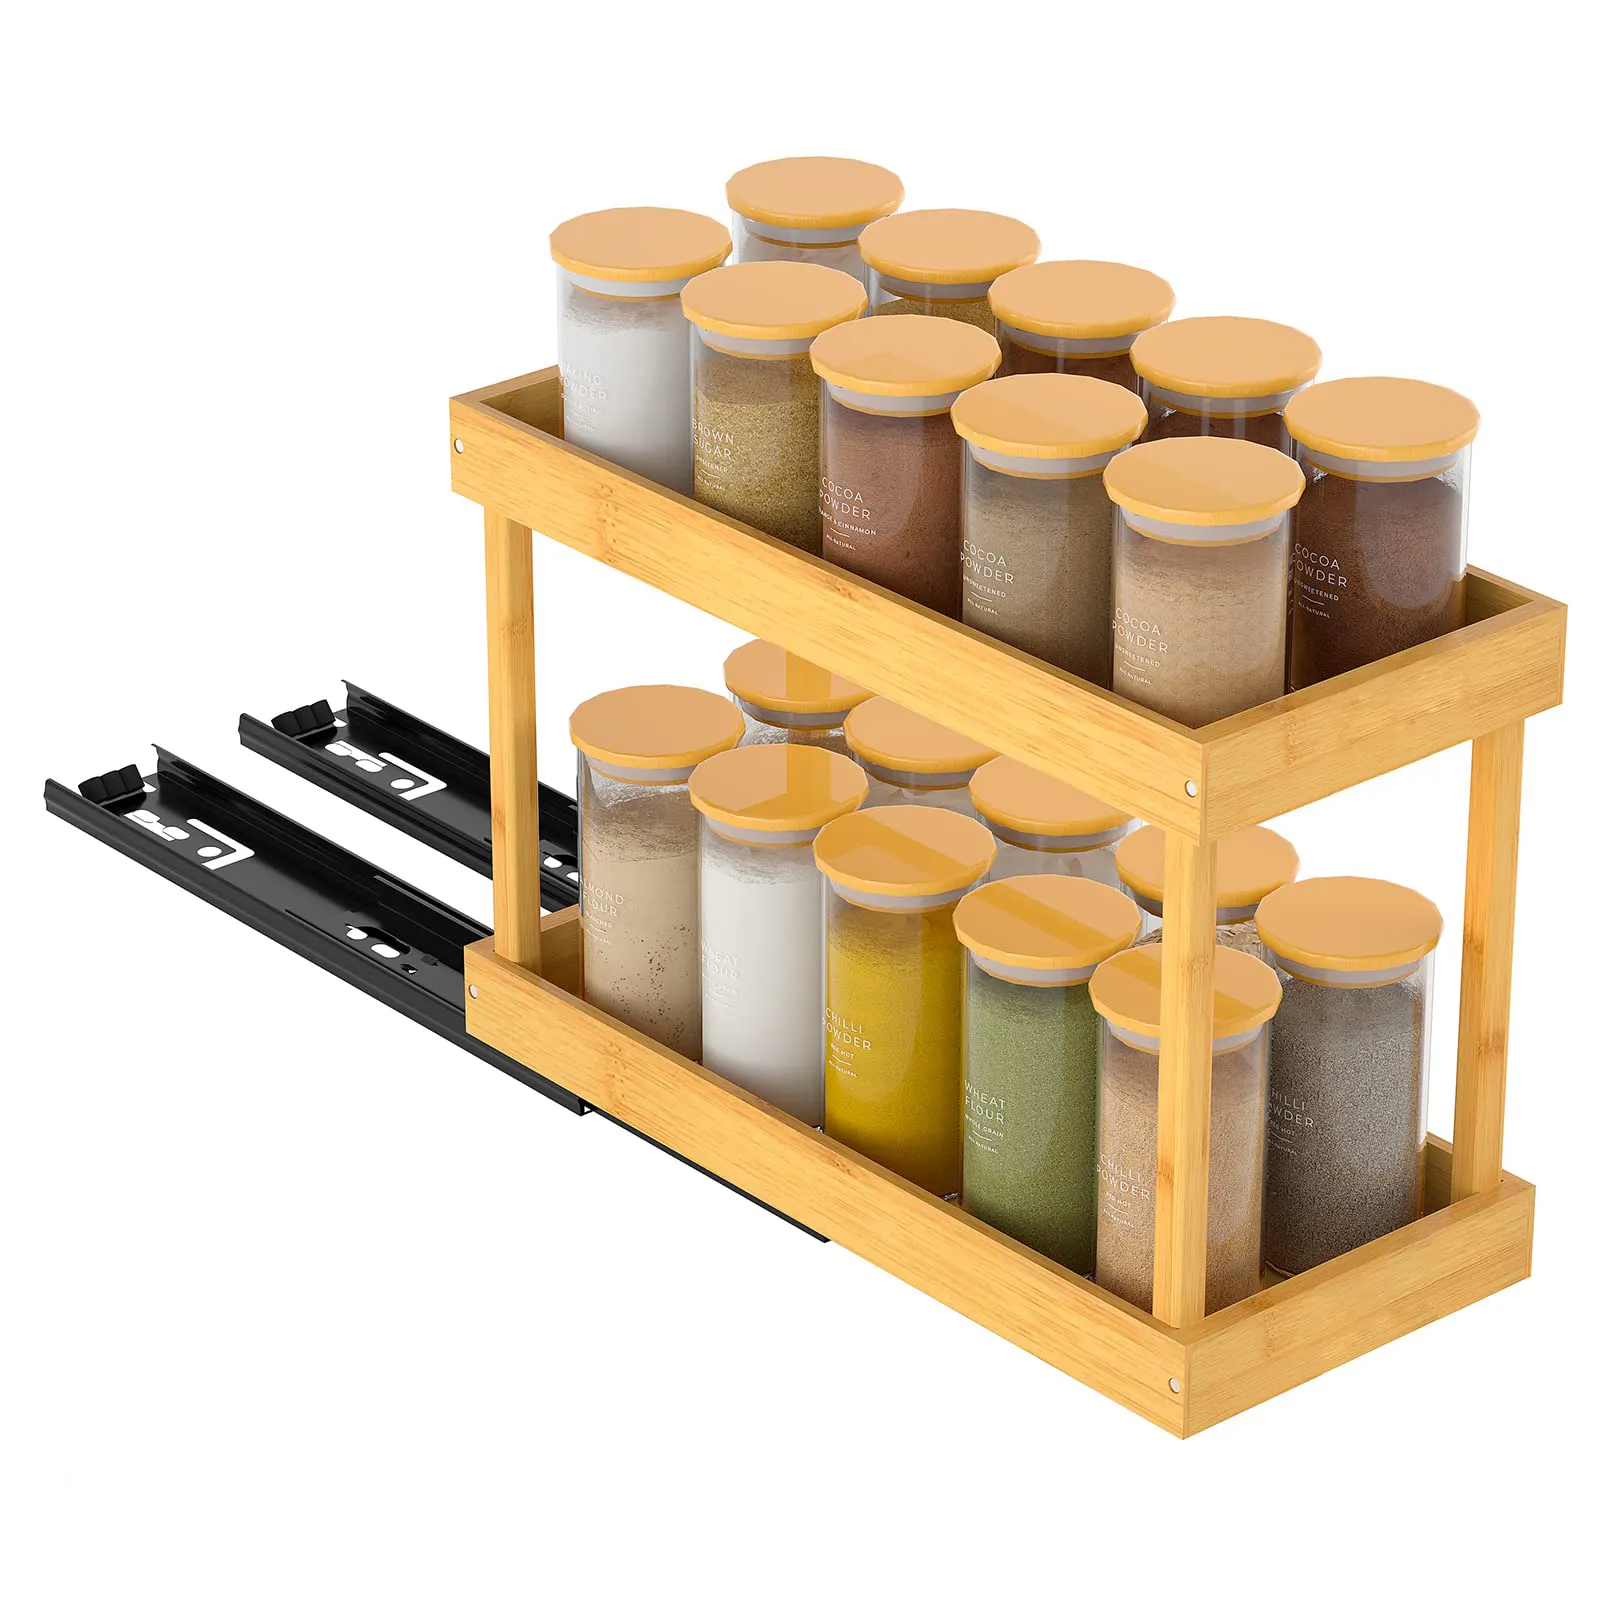 Wholesale Bamboo Spice Rack 2 Tiers Slide Out Vertical Seasoning Spice Organizer Pull Out Spice Rack Organizer for Cabinet